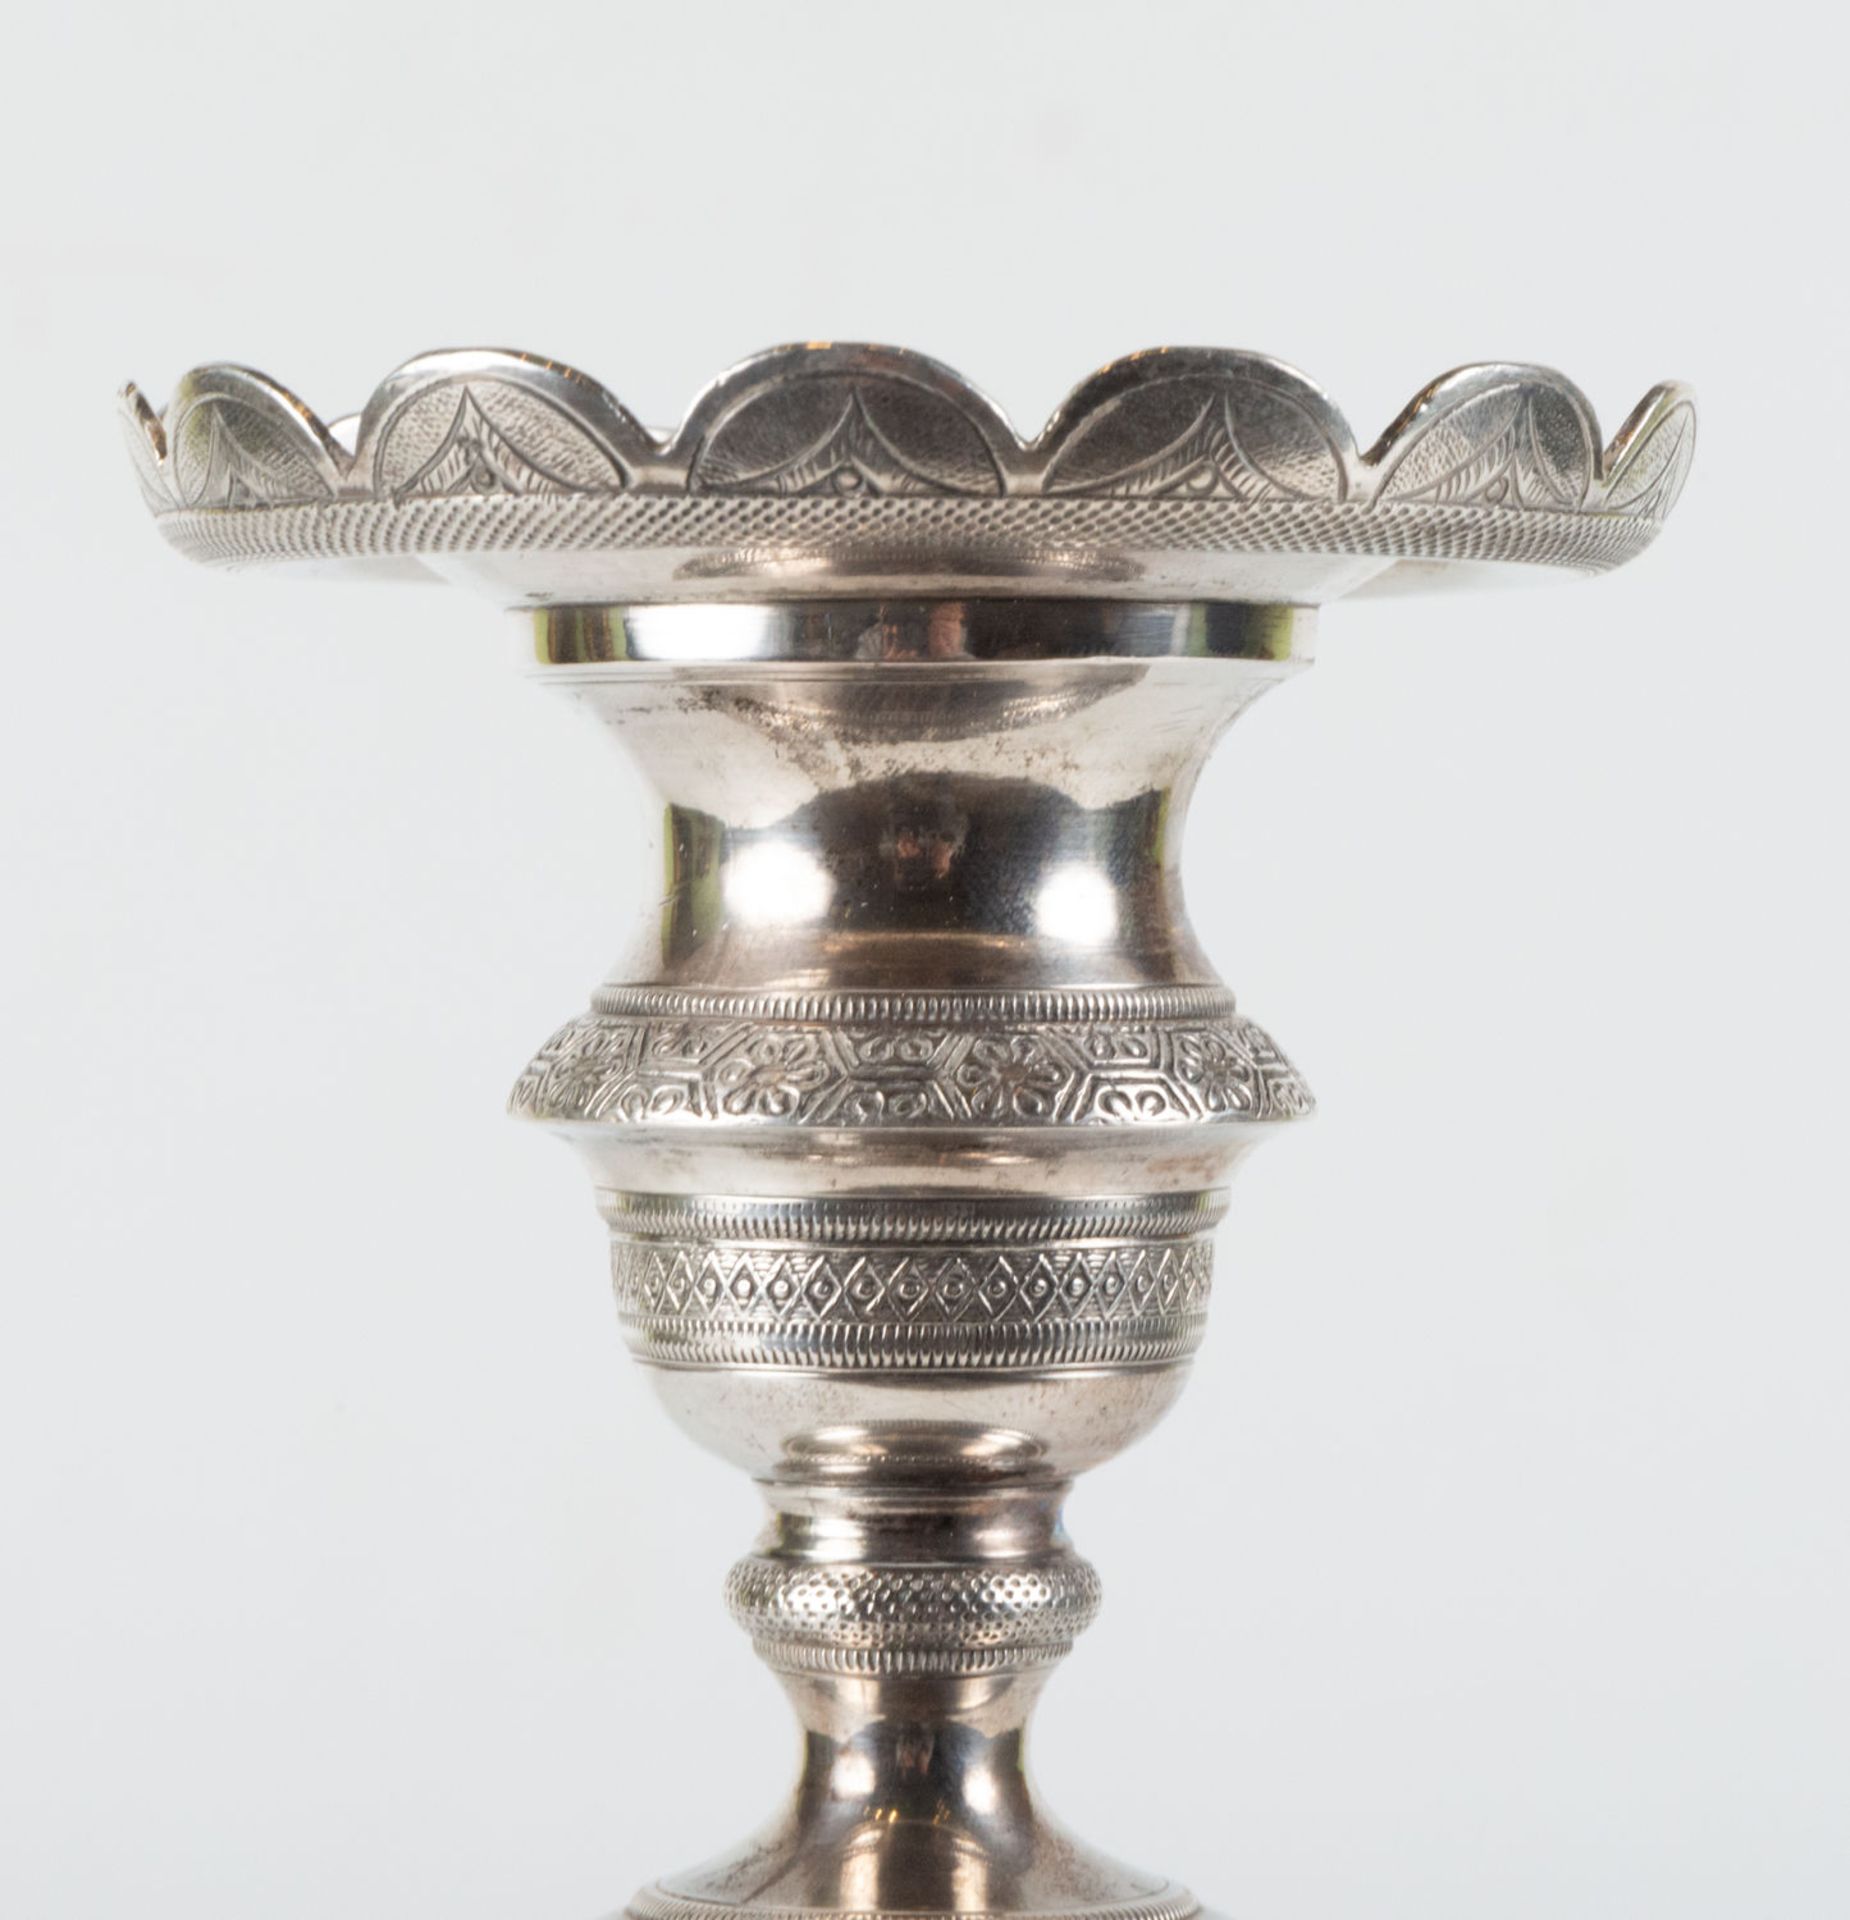 Pair of solid sterling silver candlesticks, 19th century - Image 8 of 9